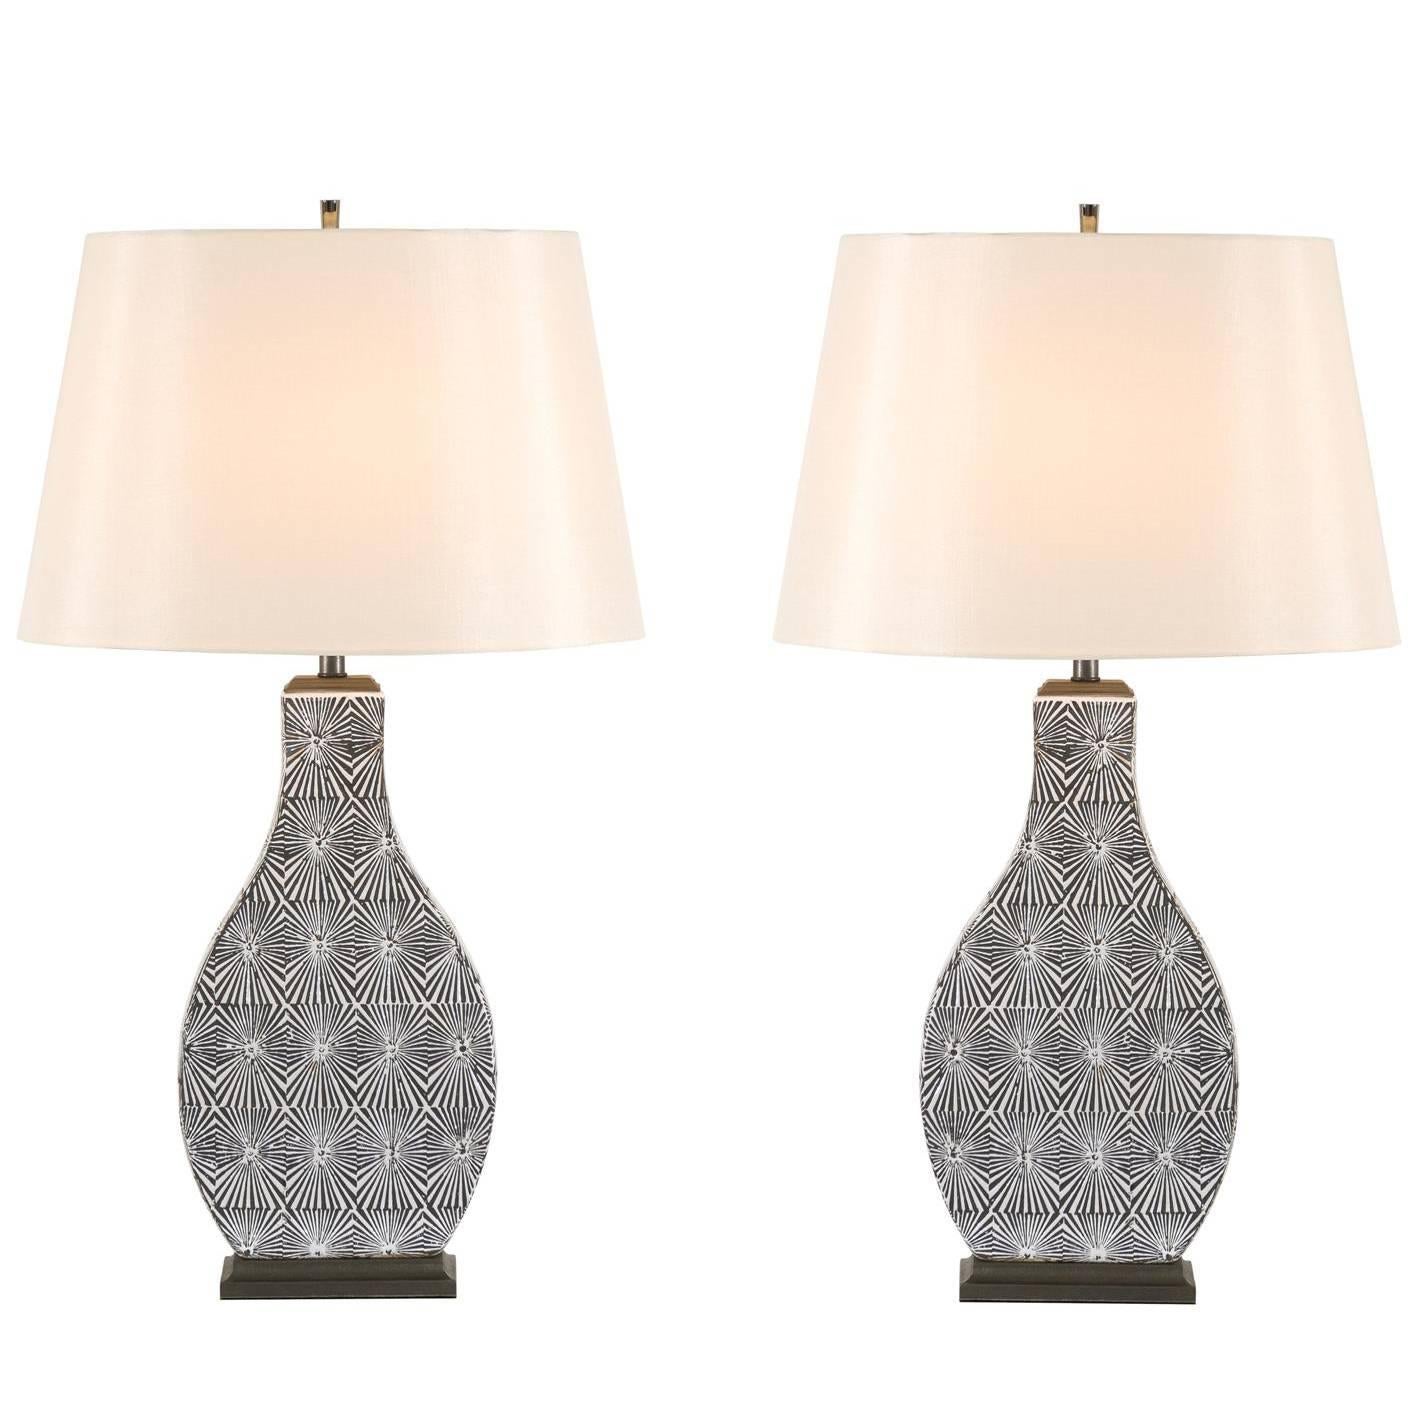 Restored Pair of Modern Ceramic Lamps in Charcoal and Cream